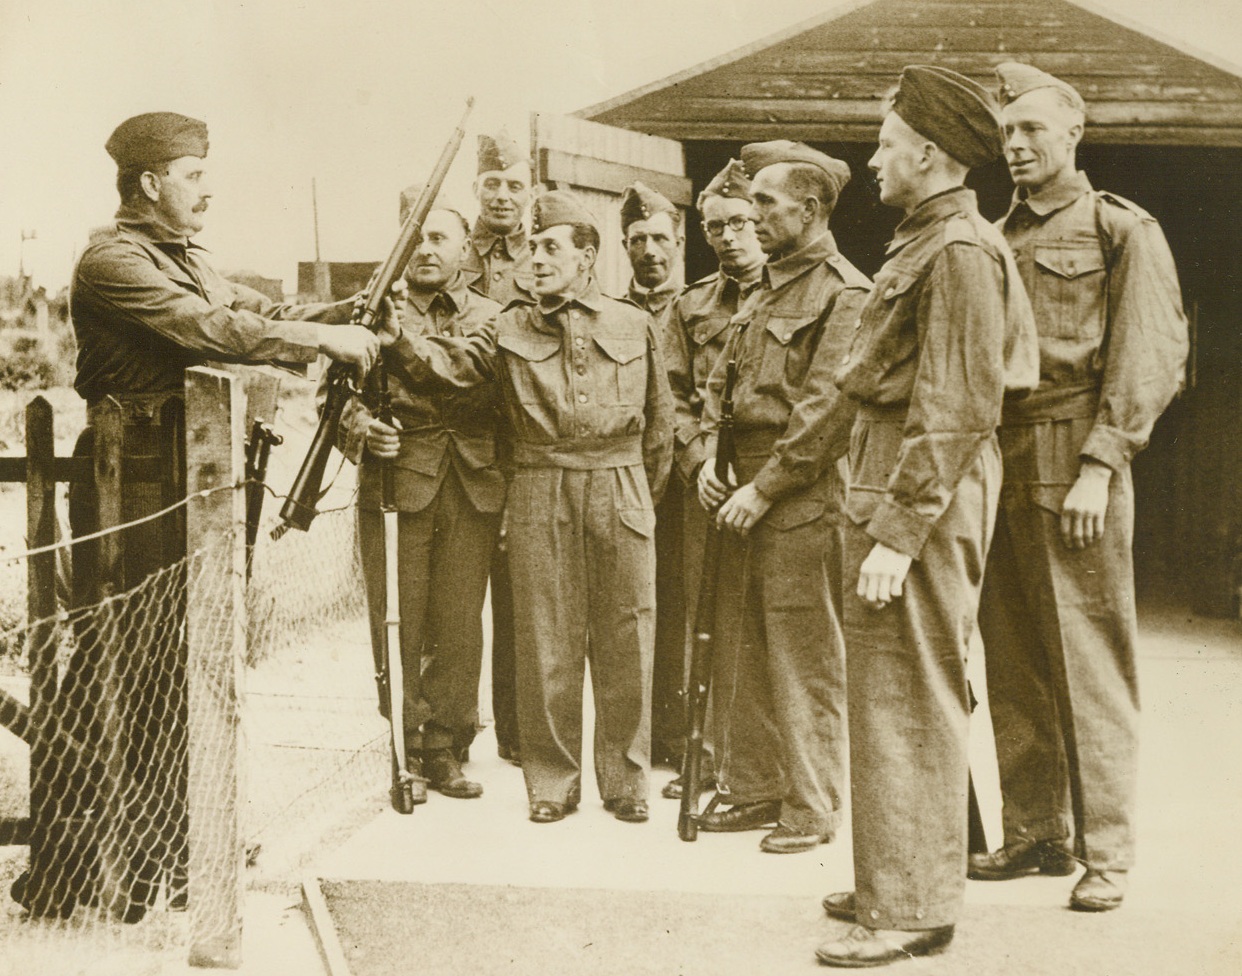 BRITAINS GETTING READY FOR PARACHUTISTS, 5/29/1940  ENGLAND—An Army sergeant of the last war handing out rifles in eastern England to Local Defense Volunteers before their first tour of duty. Some 250,000 of these Local Defense Volunteers are ready in Britain to repel invading parachute troops. Credit Line(ACME);